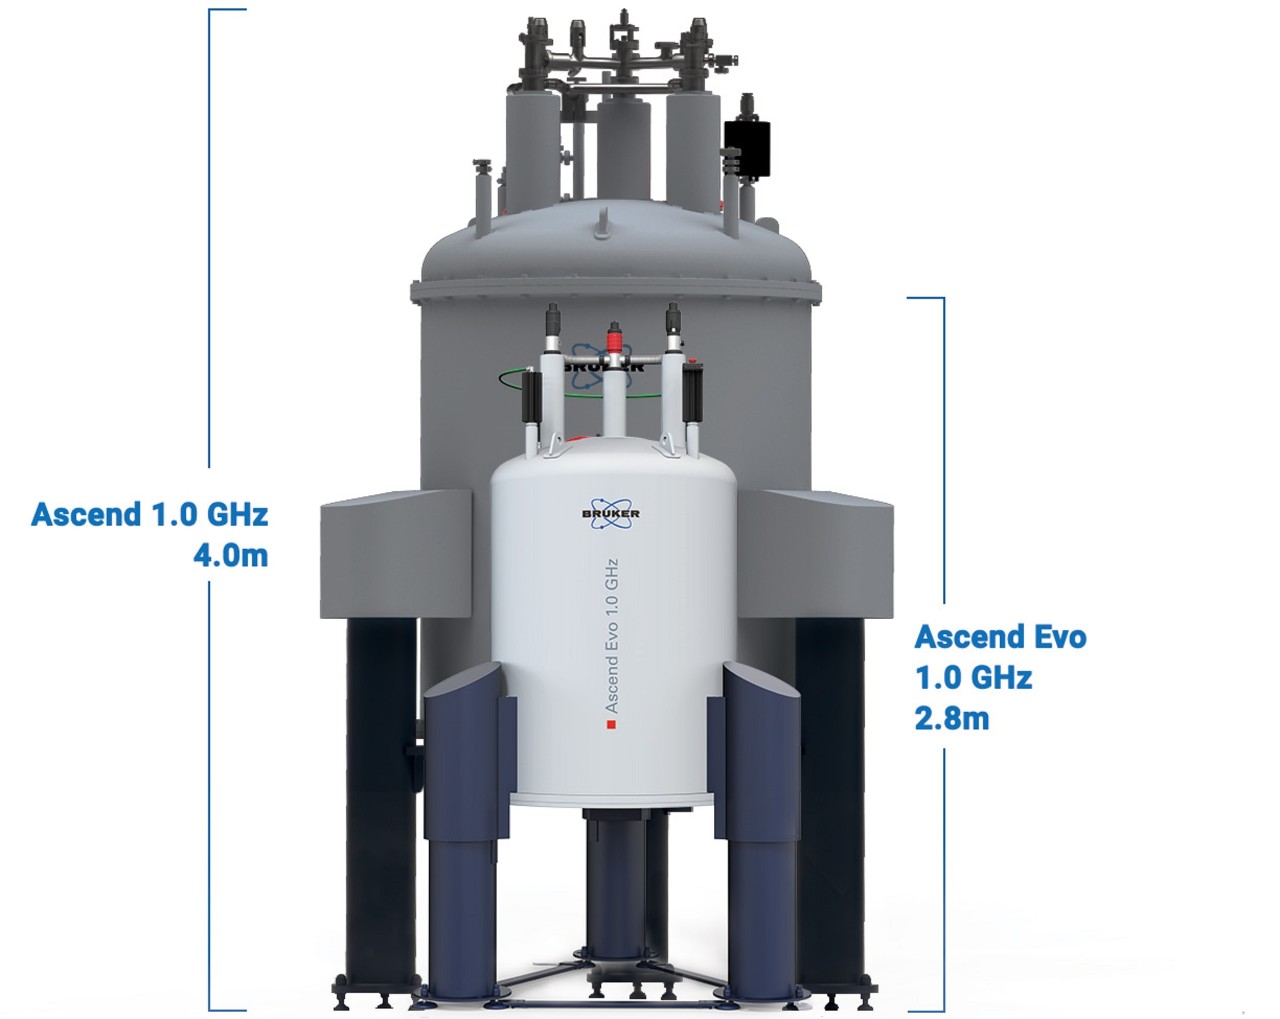 Unique compact Bruker Ascend Evo 1.0 GHz magnet offers significantly reduced footprint, weight, and ceiling height requirements, as well as a dramatic threefold reduction in liquid helium consumption.